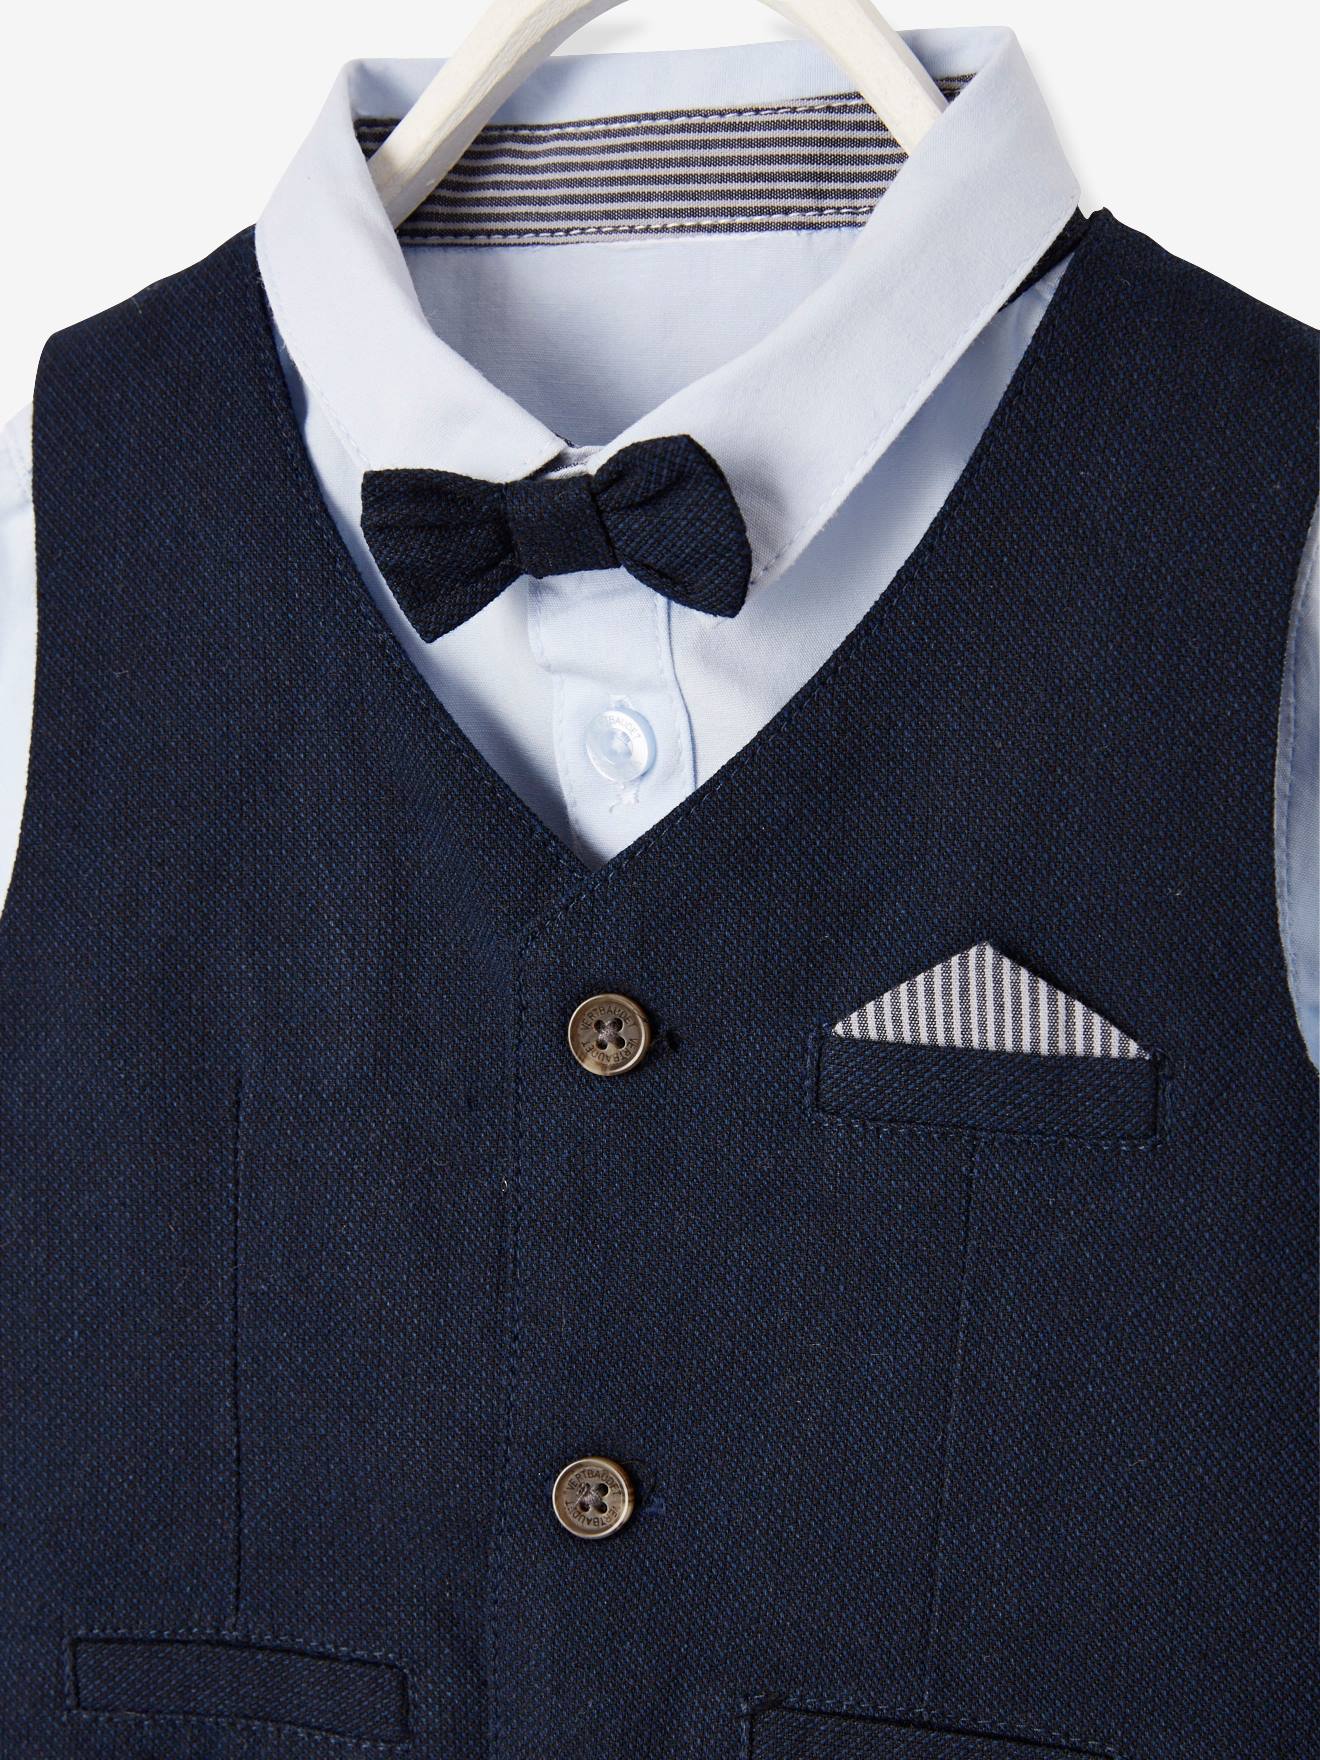 ARTMINE Baby & Little Boy 3-Piece Vest Set with Bow Tie Dress Shirt Pants and Vest 6 Months-5 Years 